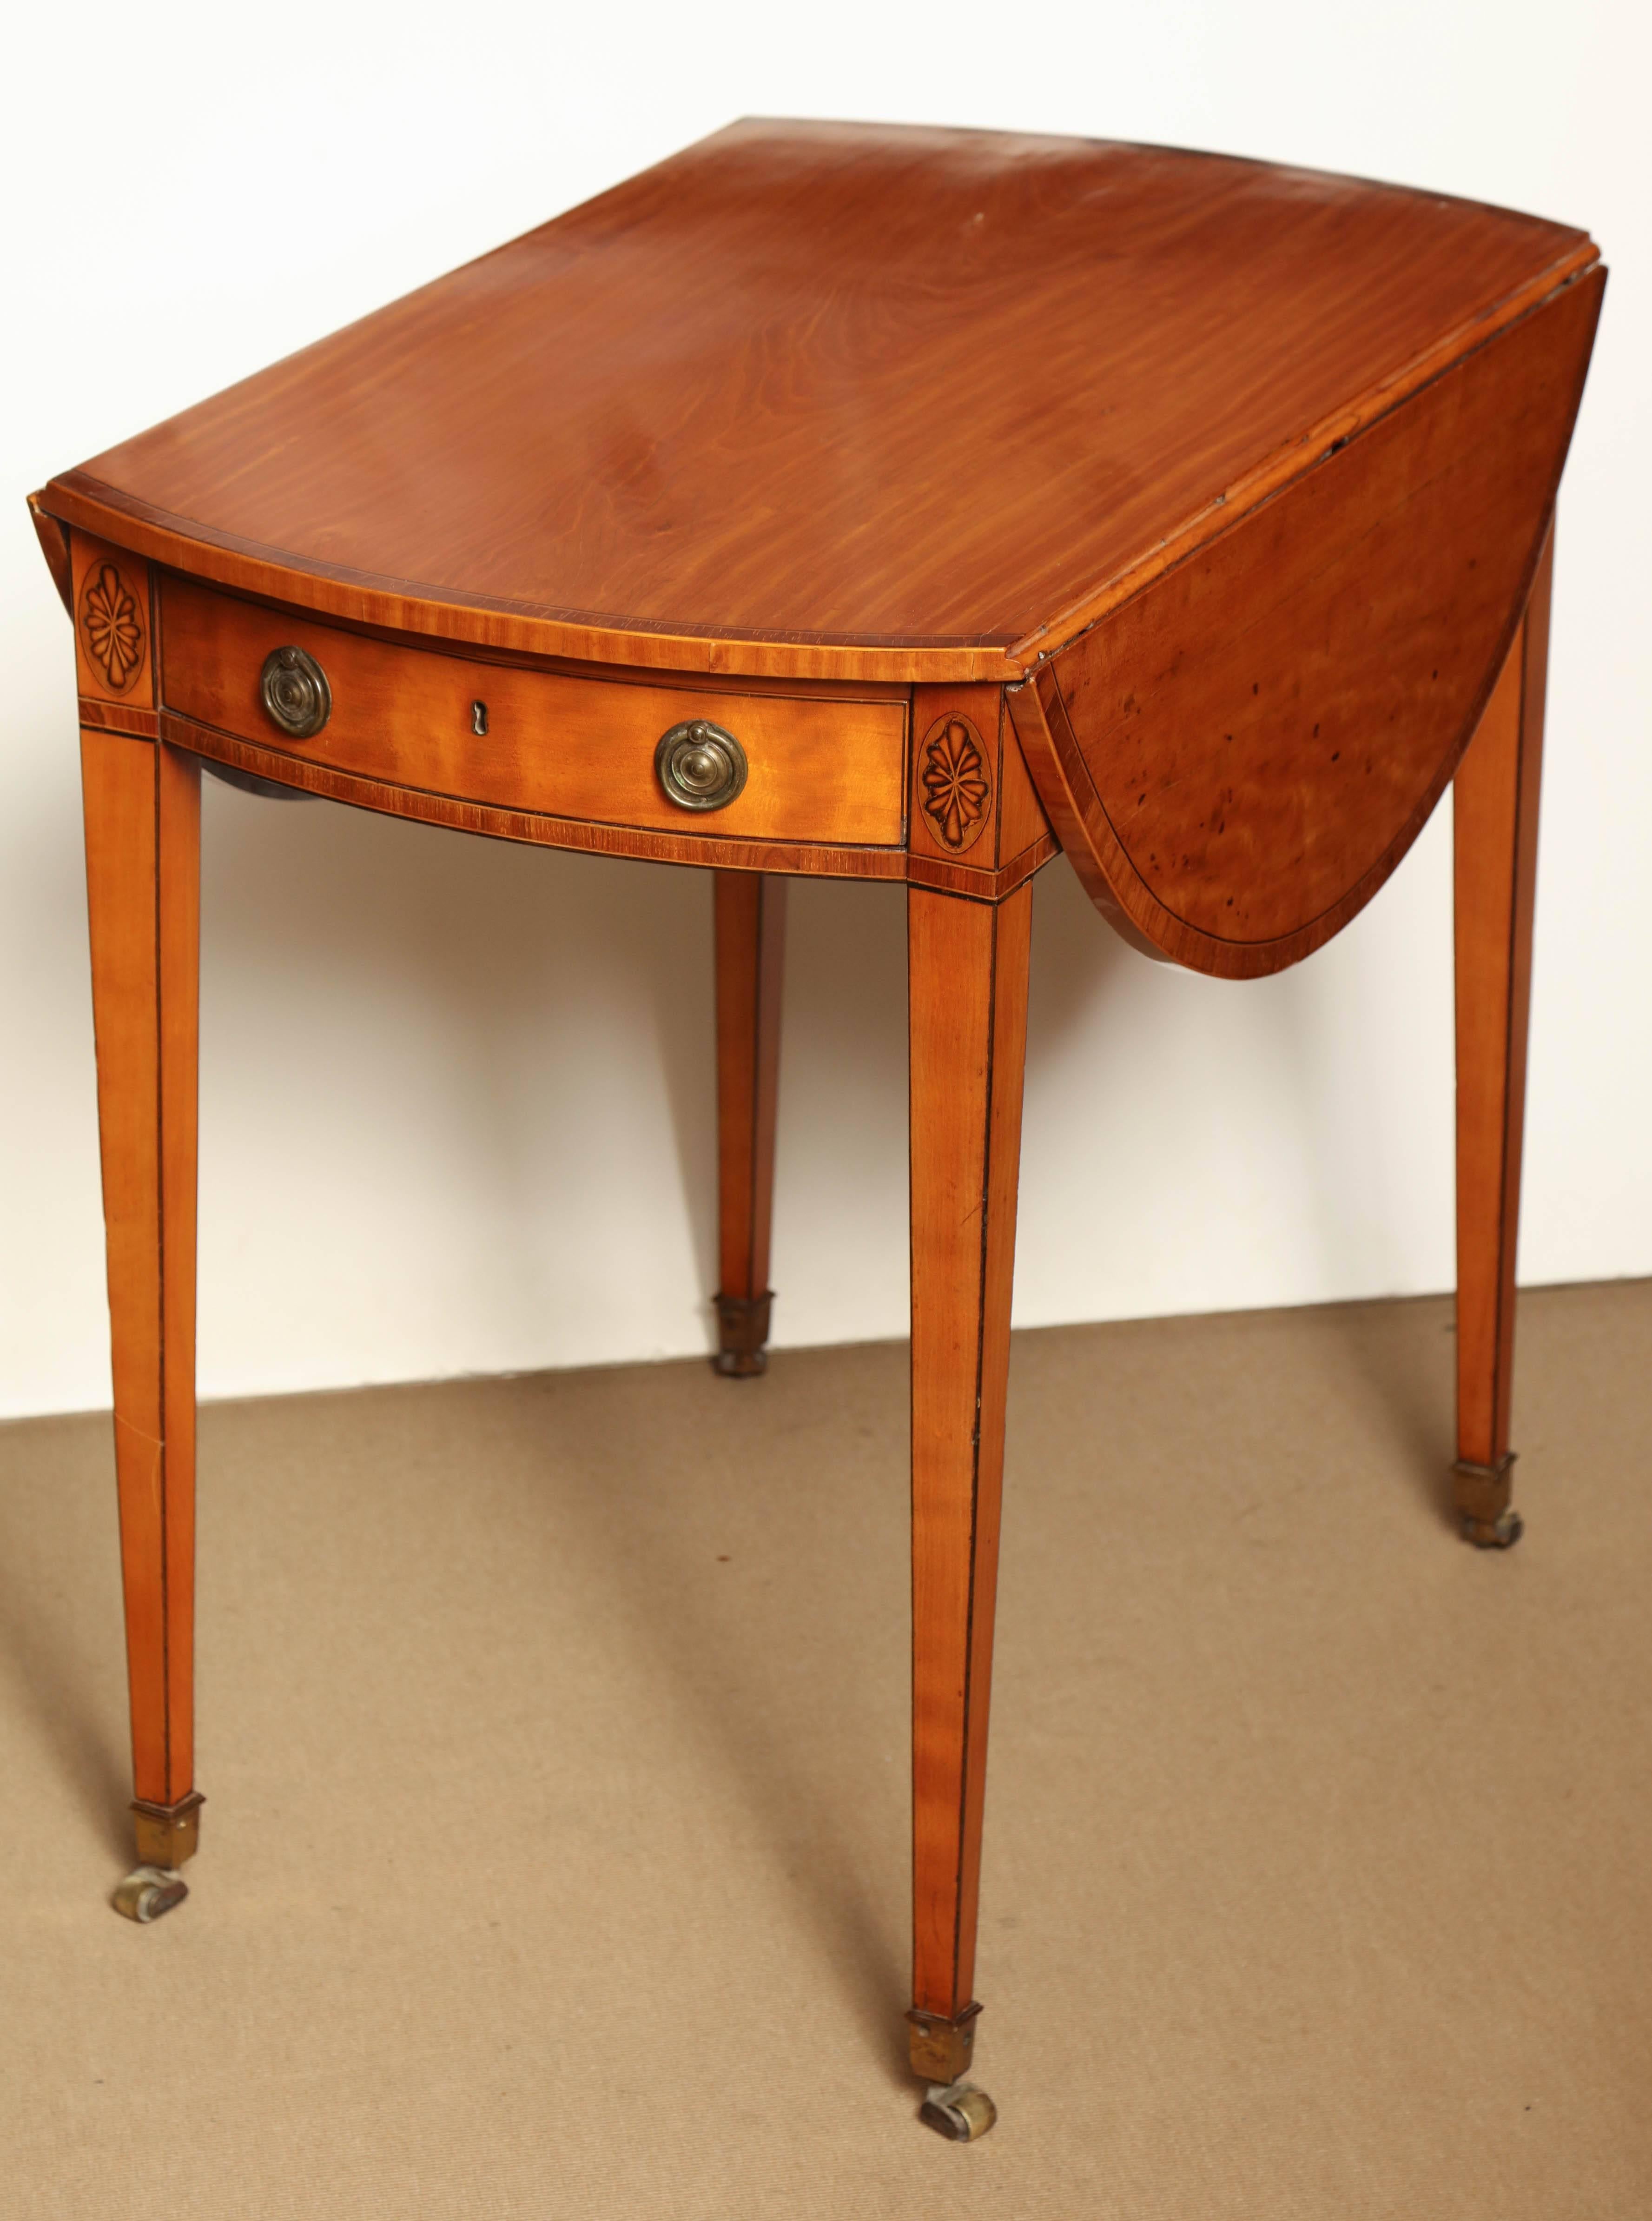 Late 18th century English George III pembroke table with one-drawer.